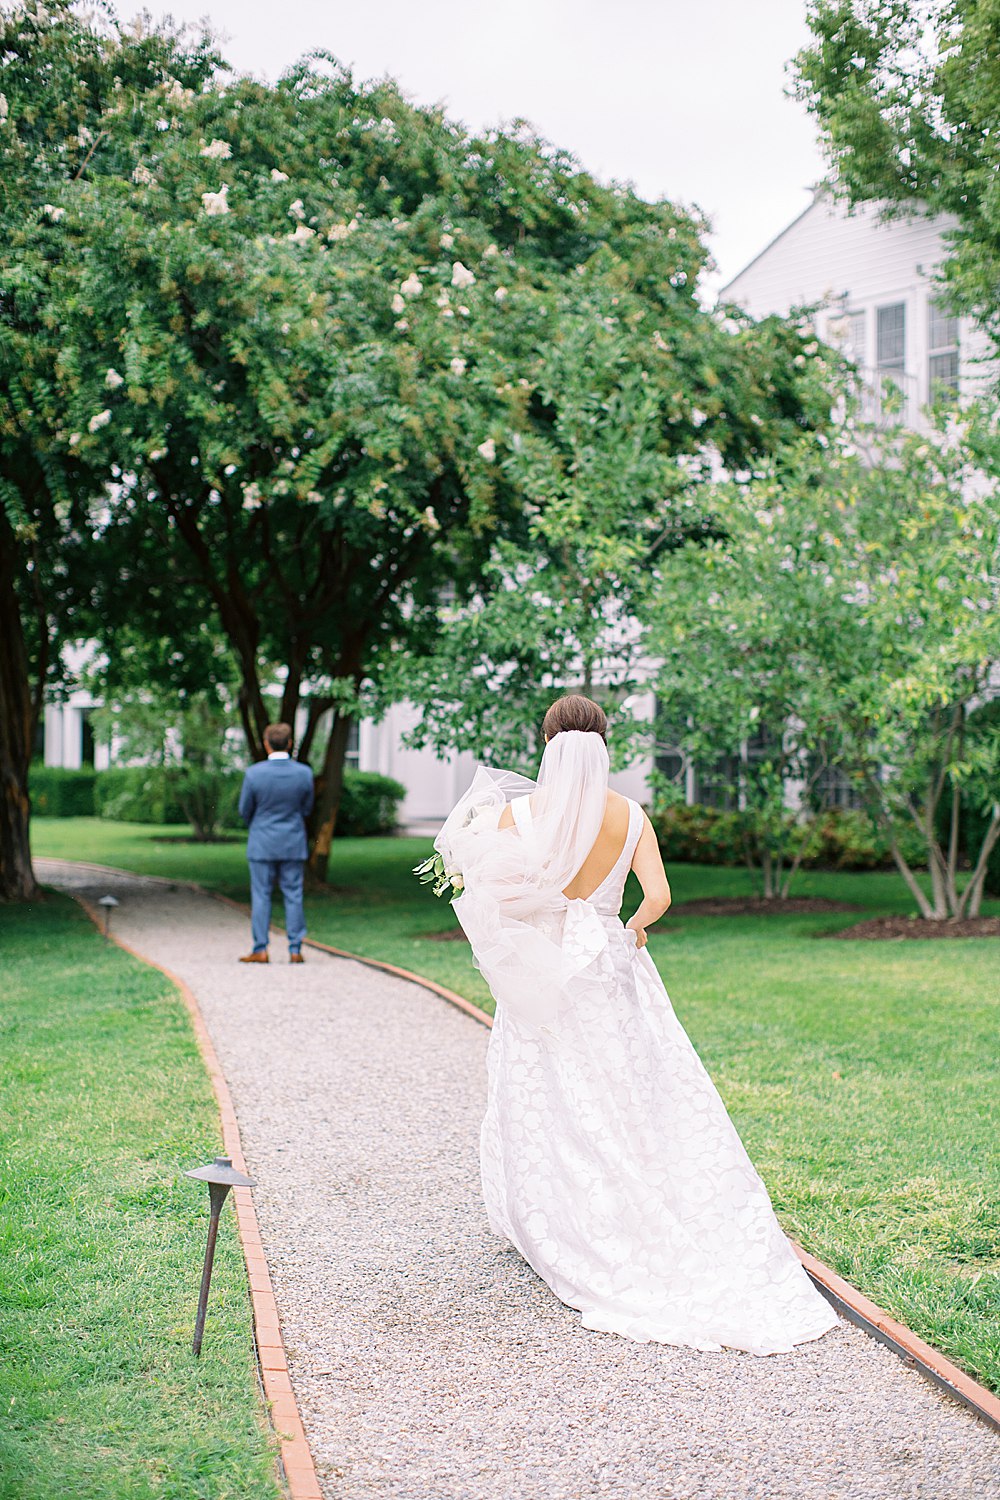 Early September wedding at The Inn at Perry Cabin in St. Michael's, Maryland.